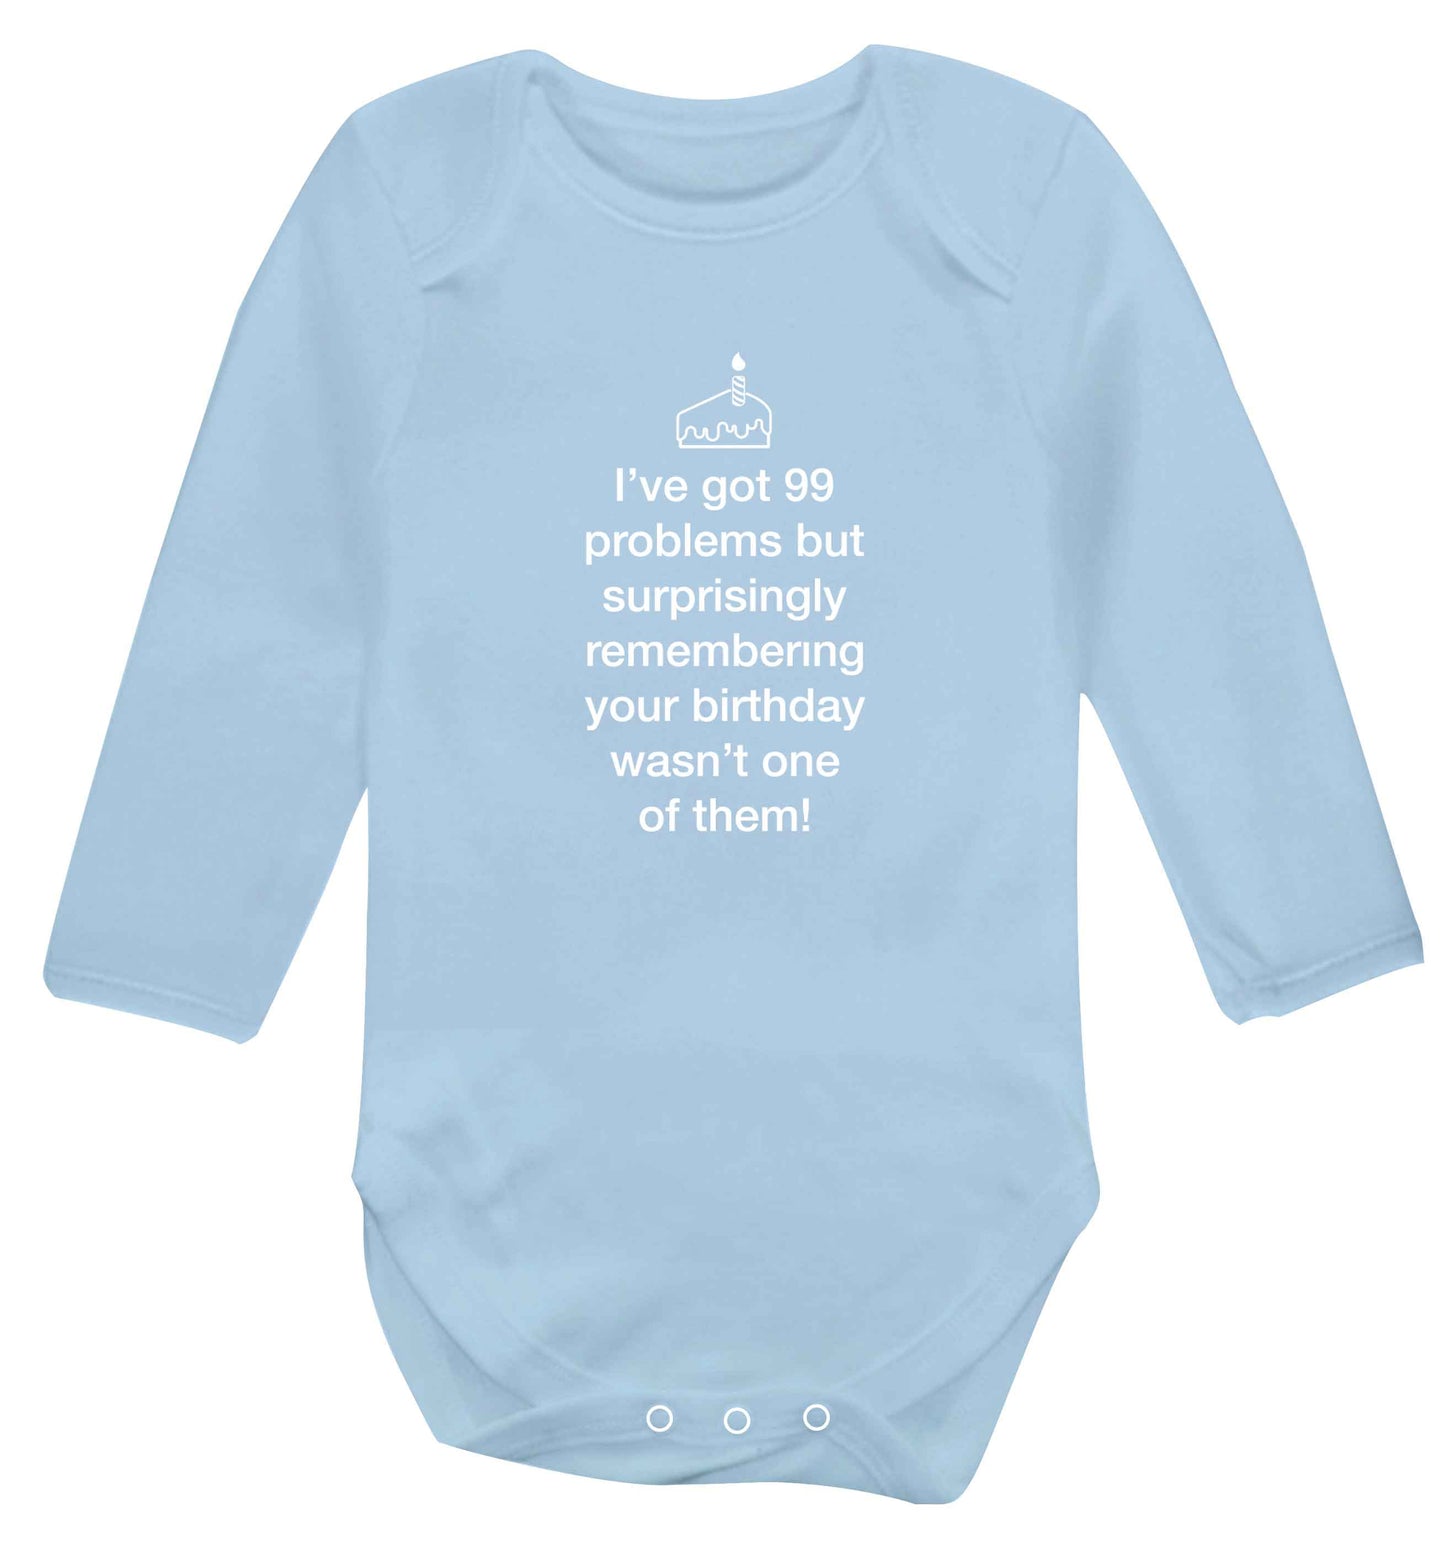 I've got 99 problems but surprisingly remembering your birthday wasn't one of them! baby vest long sleeved pale blue 6-12 months